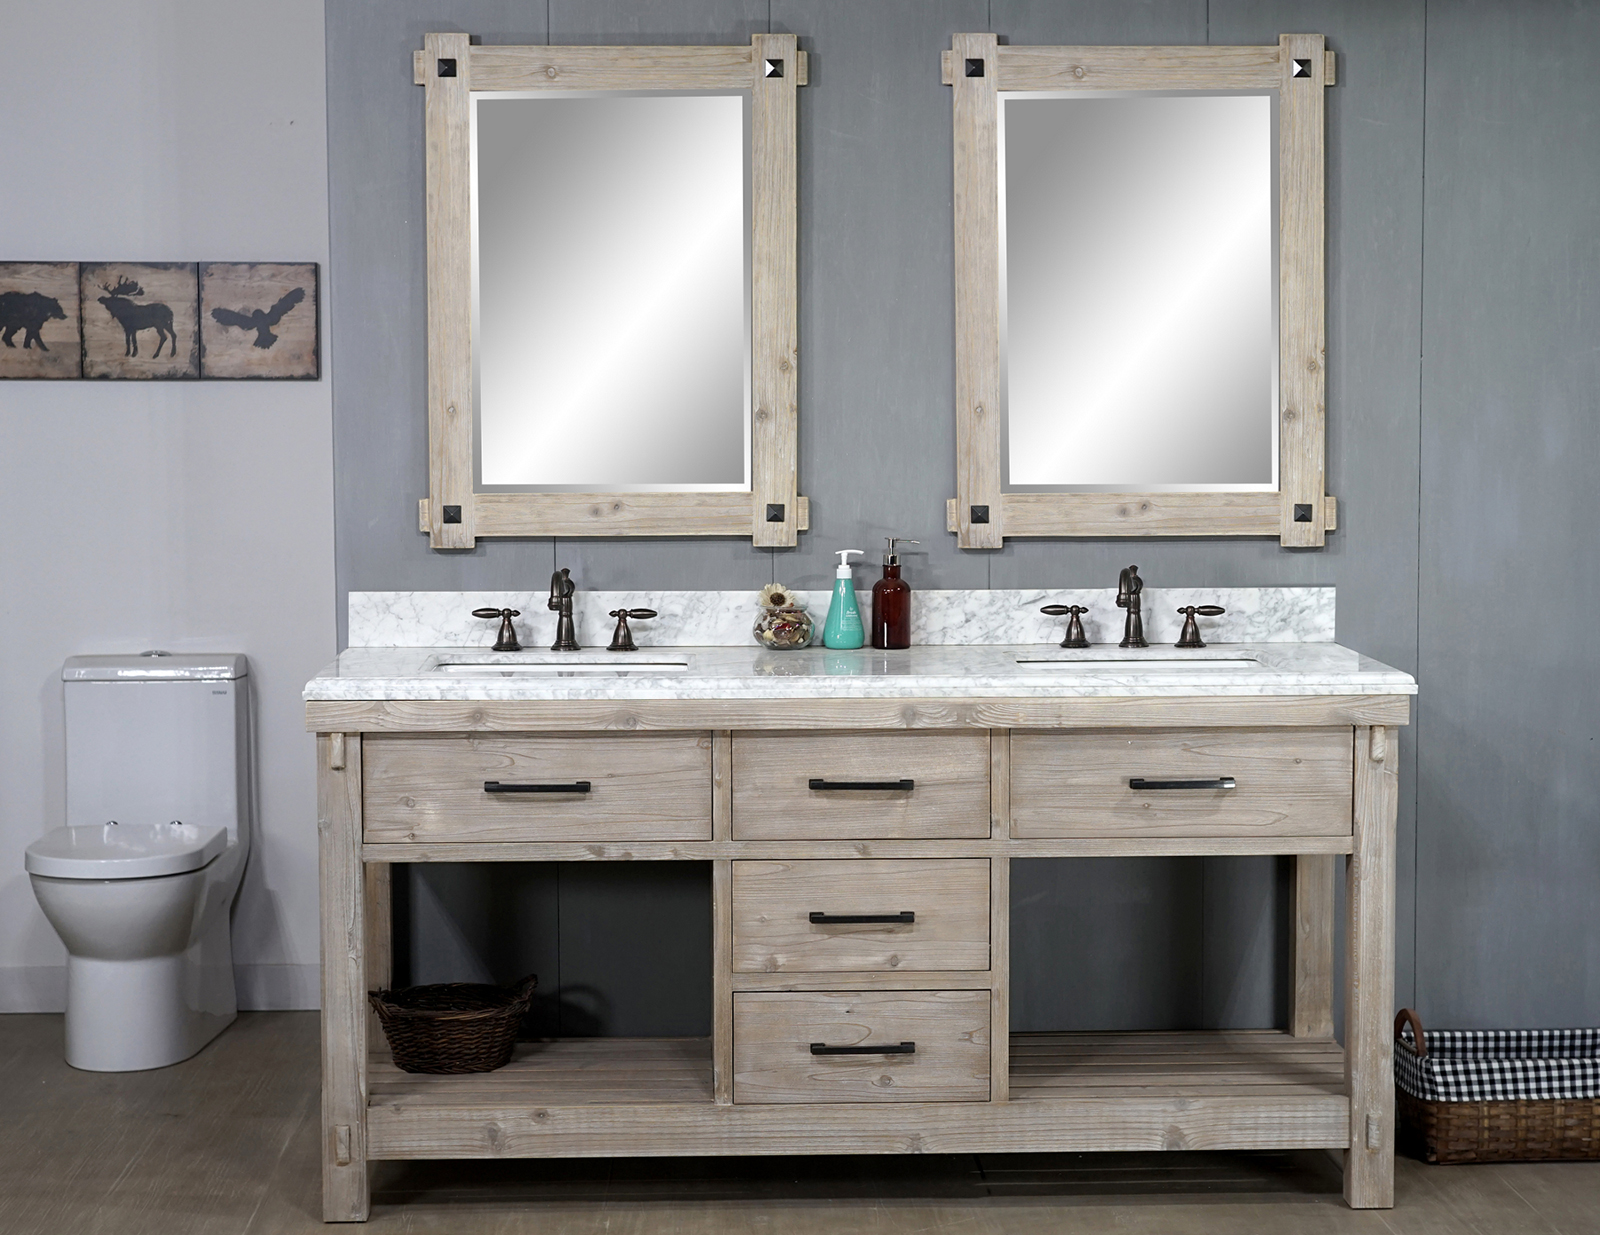 72" Rustic Solid Fir Double Sink Vanity with Carrara White Marble Top Beveled Edge and Rectangular Sink - No Faucet